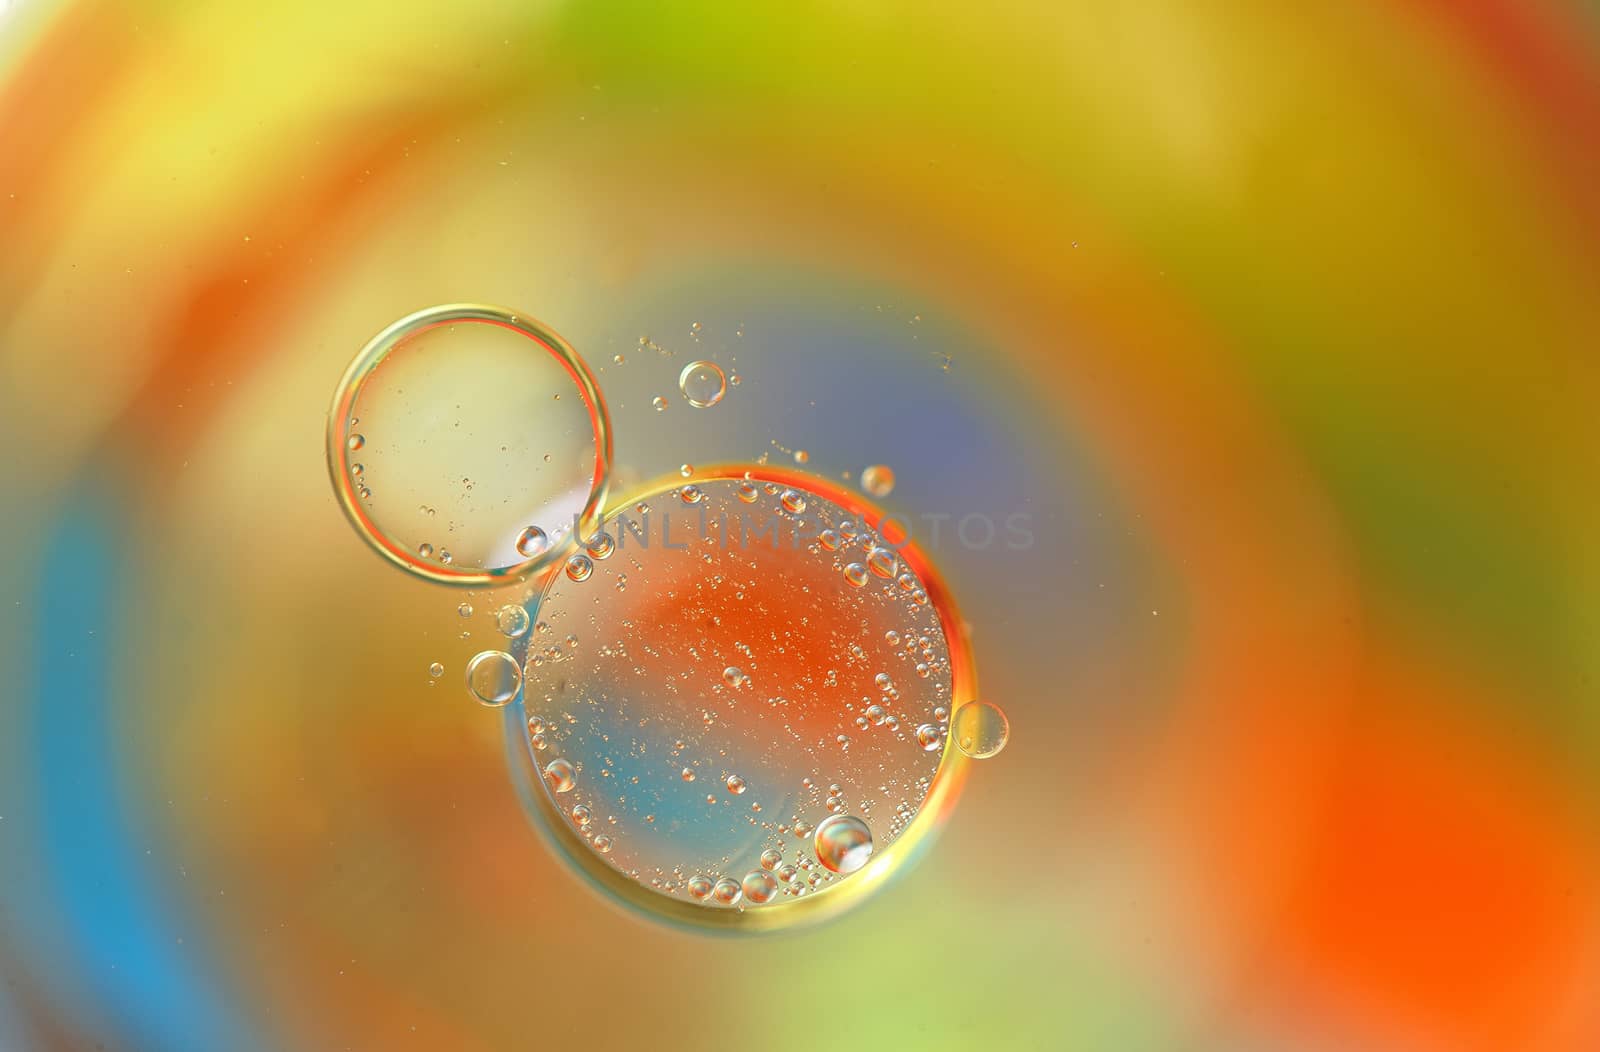 Colrful background with oil bubbles